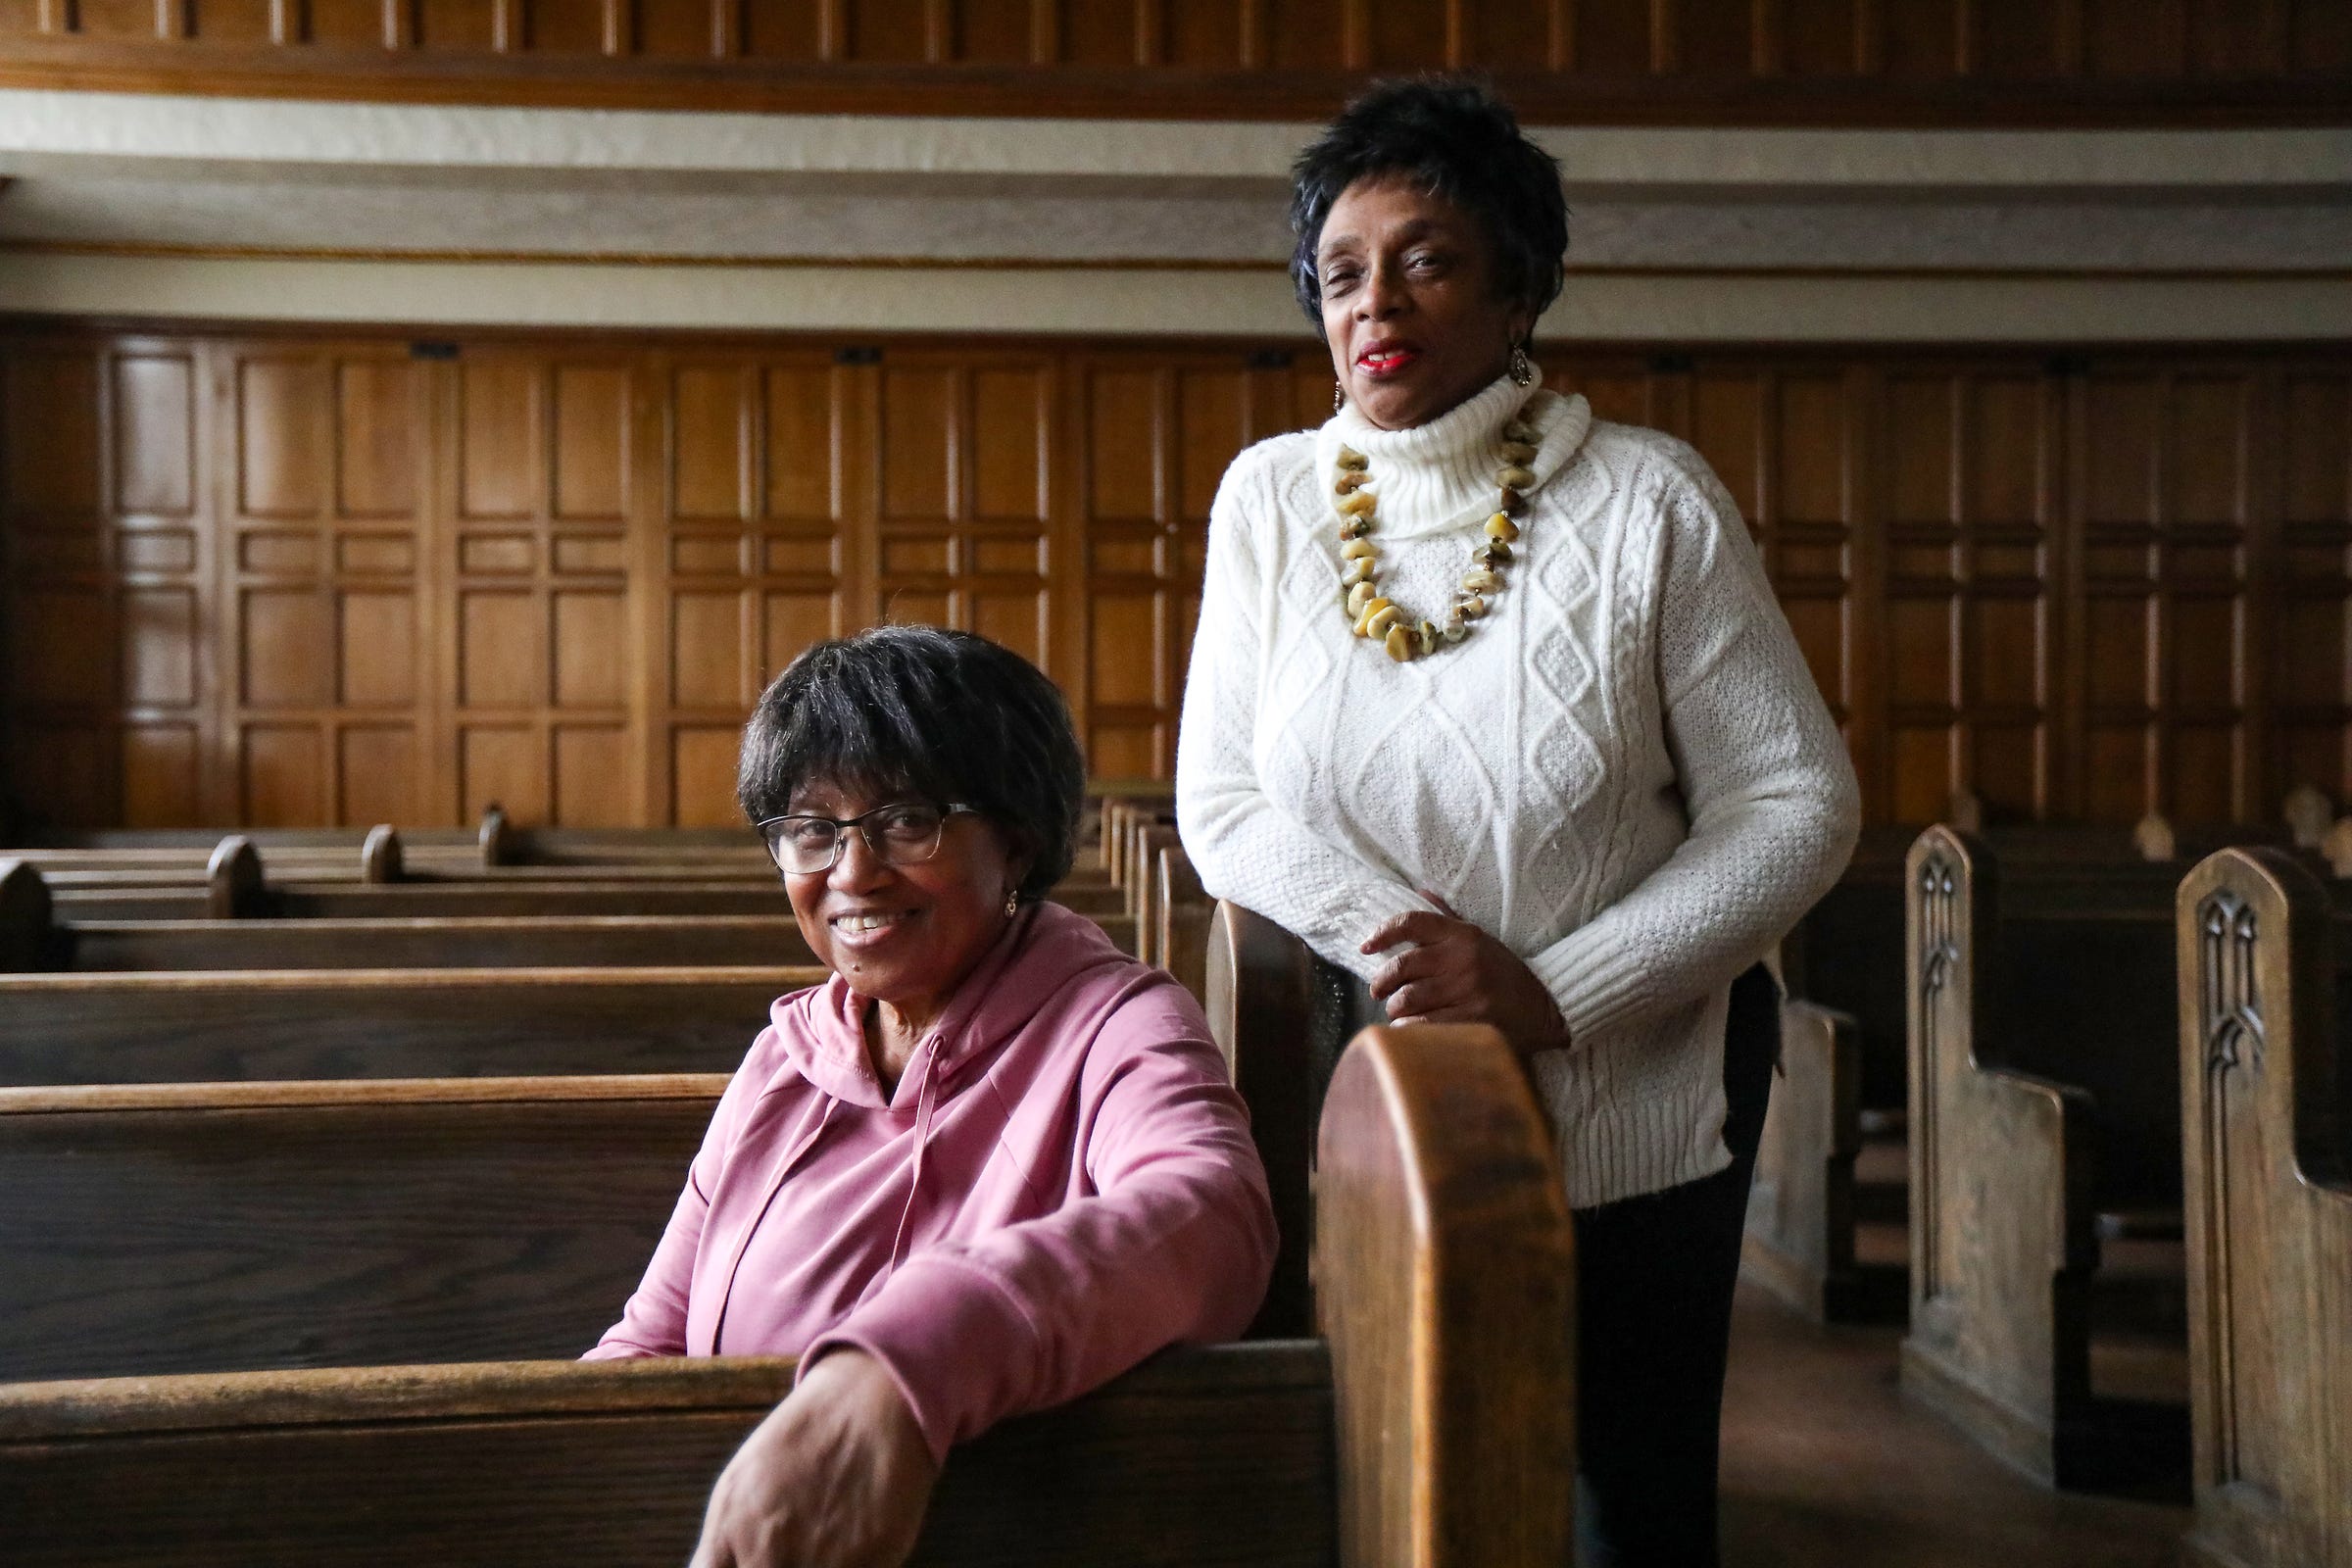 Edna Todd Walker left, and Darlene Jackson sit in the original chapel at the Historic Ebenezer African Methodist Episcopal Church in Detroit on Nov. 4, 2021. Walker is the director of the Ebenezer Community and Cultural Center and Jackson is the church historian. It is the 6th oldest African American congregation in Detroit. Organized in 1871 to serve as a harbor for newly freed Black Americans migrating from the antebellum South, the history of the Historic Ebenezer AME Church is entrenched in the traditions of social progress in Detroit. From housing Negro soldiers during WWII to serving as a training center for boxing great Joe Louis, Ebenezer has been a backdrop for Detroit's history. By housing the homeless and providing clothes for the needy the church continues its time-honored motto of "Love Makes the Difference." The name Ebenezer means Stone of Help.